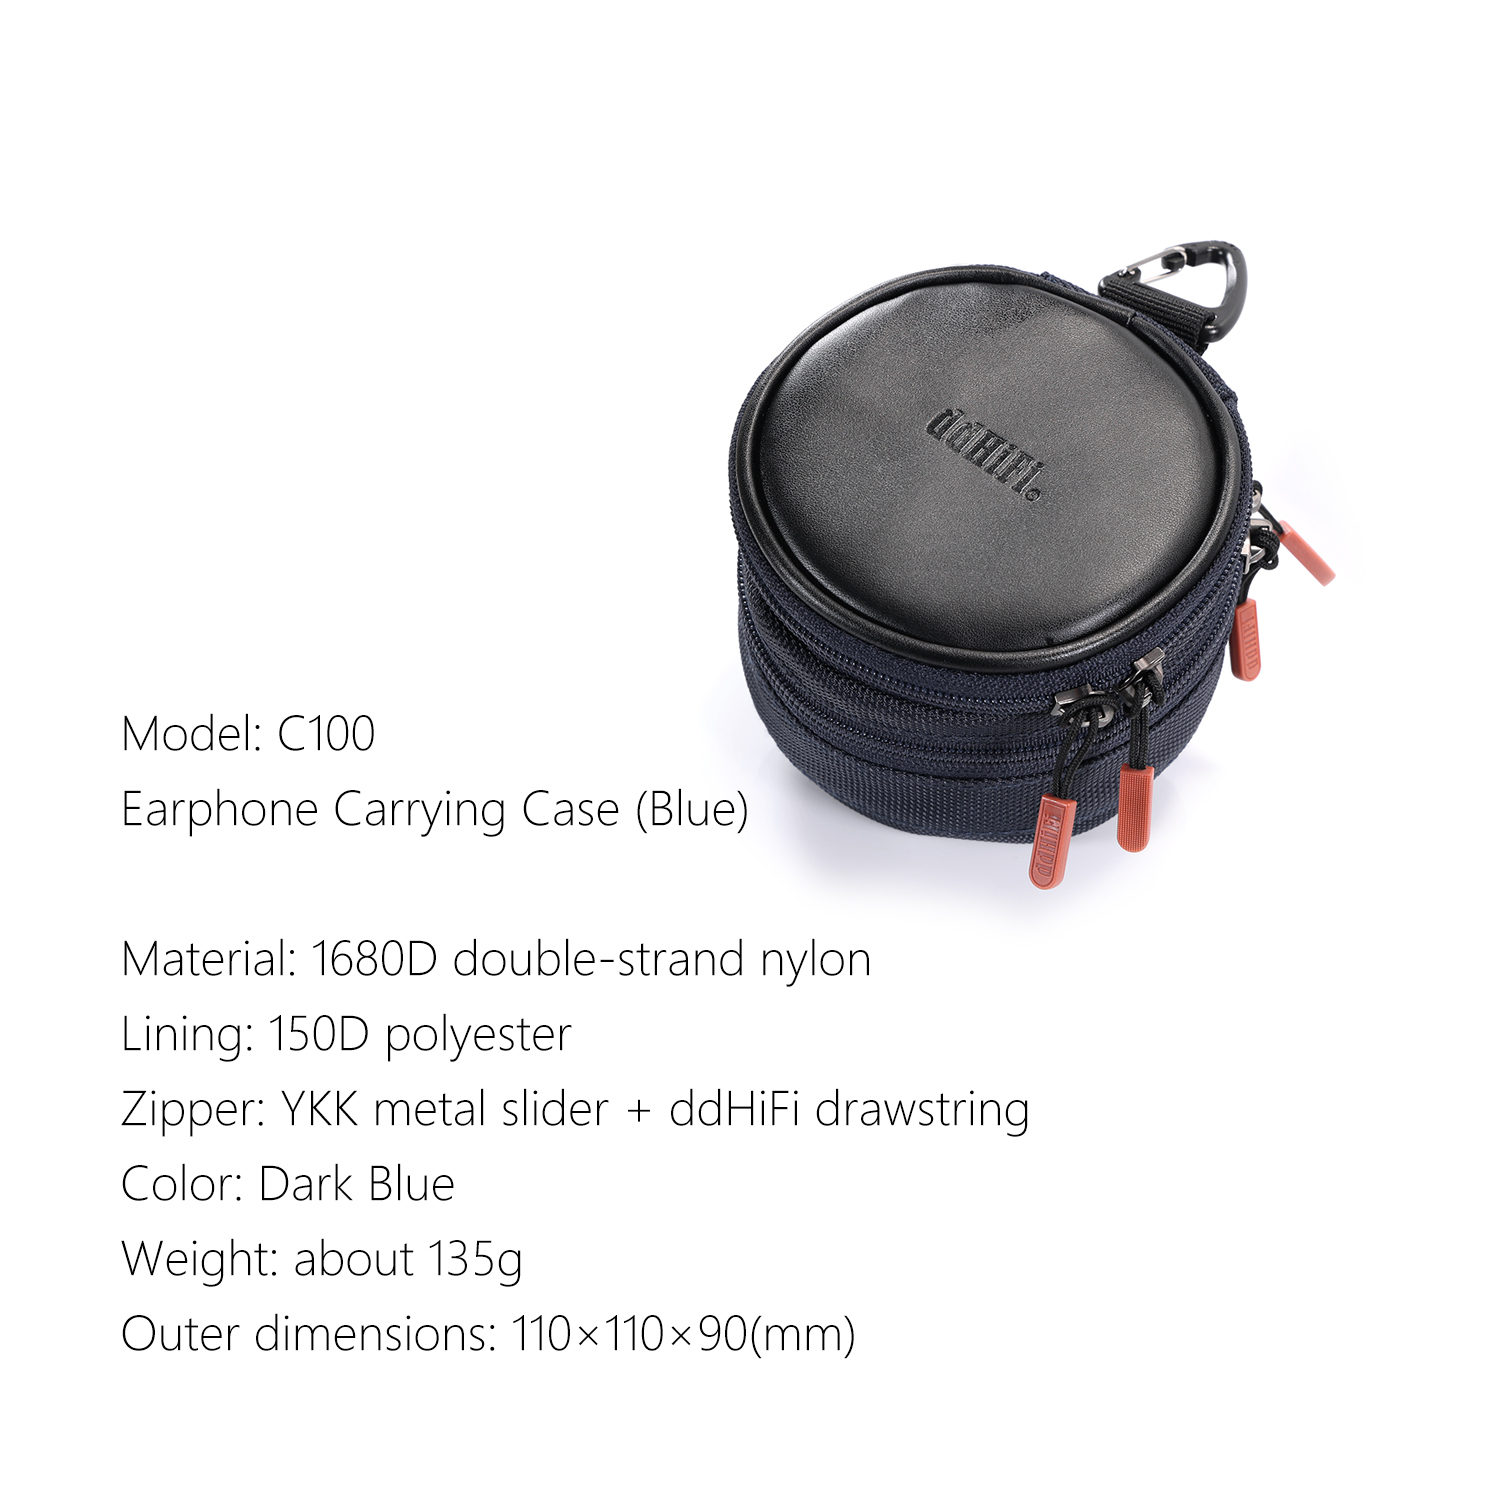 DD ddHiFi C100 specifications including 1680D double-strand nylon, 150D polyester, and drawstring